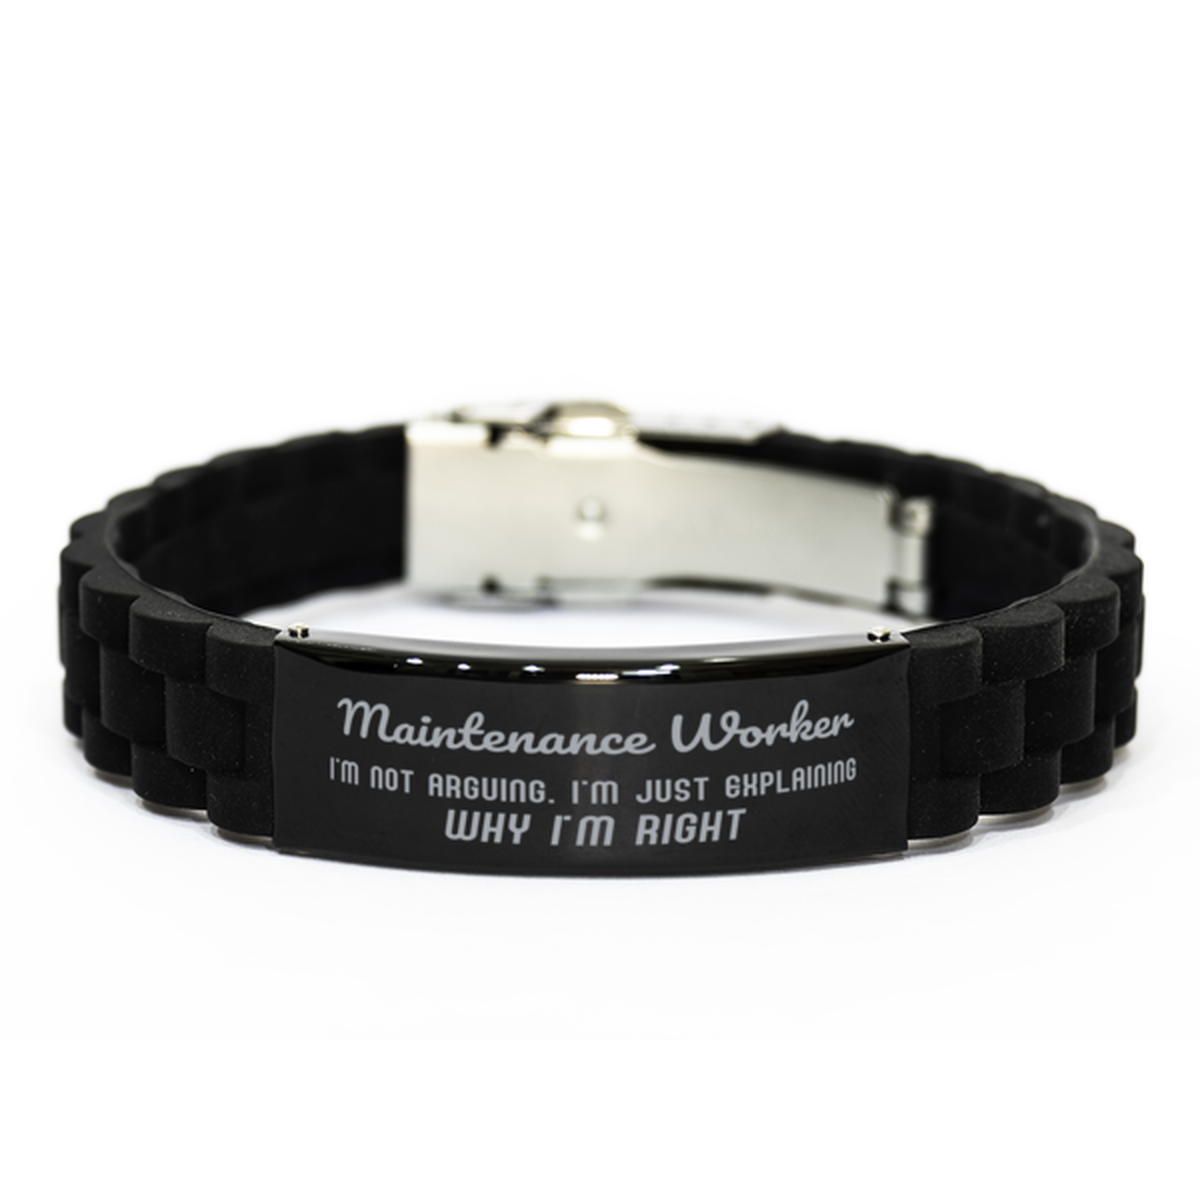 Maintenance Worker I'm not Arguing. I'm Just Explaining Why I'm RIGHT Black Glidelock Clasp Bracelet, Funny Saying Quote Maintenance Worker Gifts For Maintenance Worker Graduation Birthday Christmas Gifts for Men Women Coworker